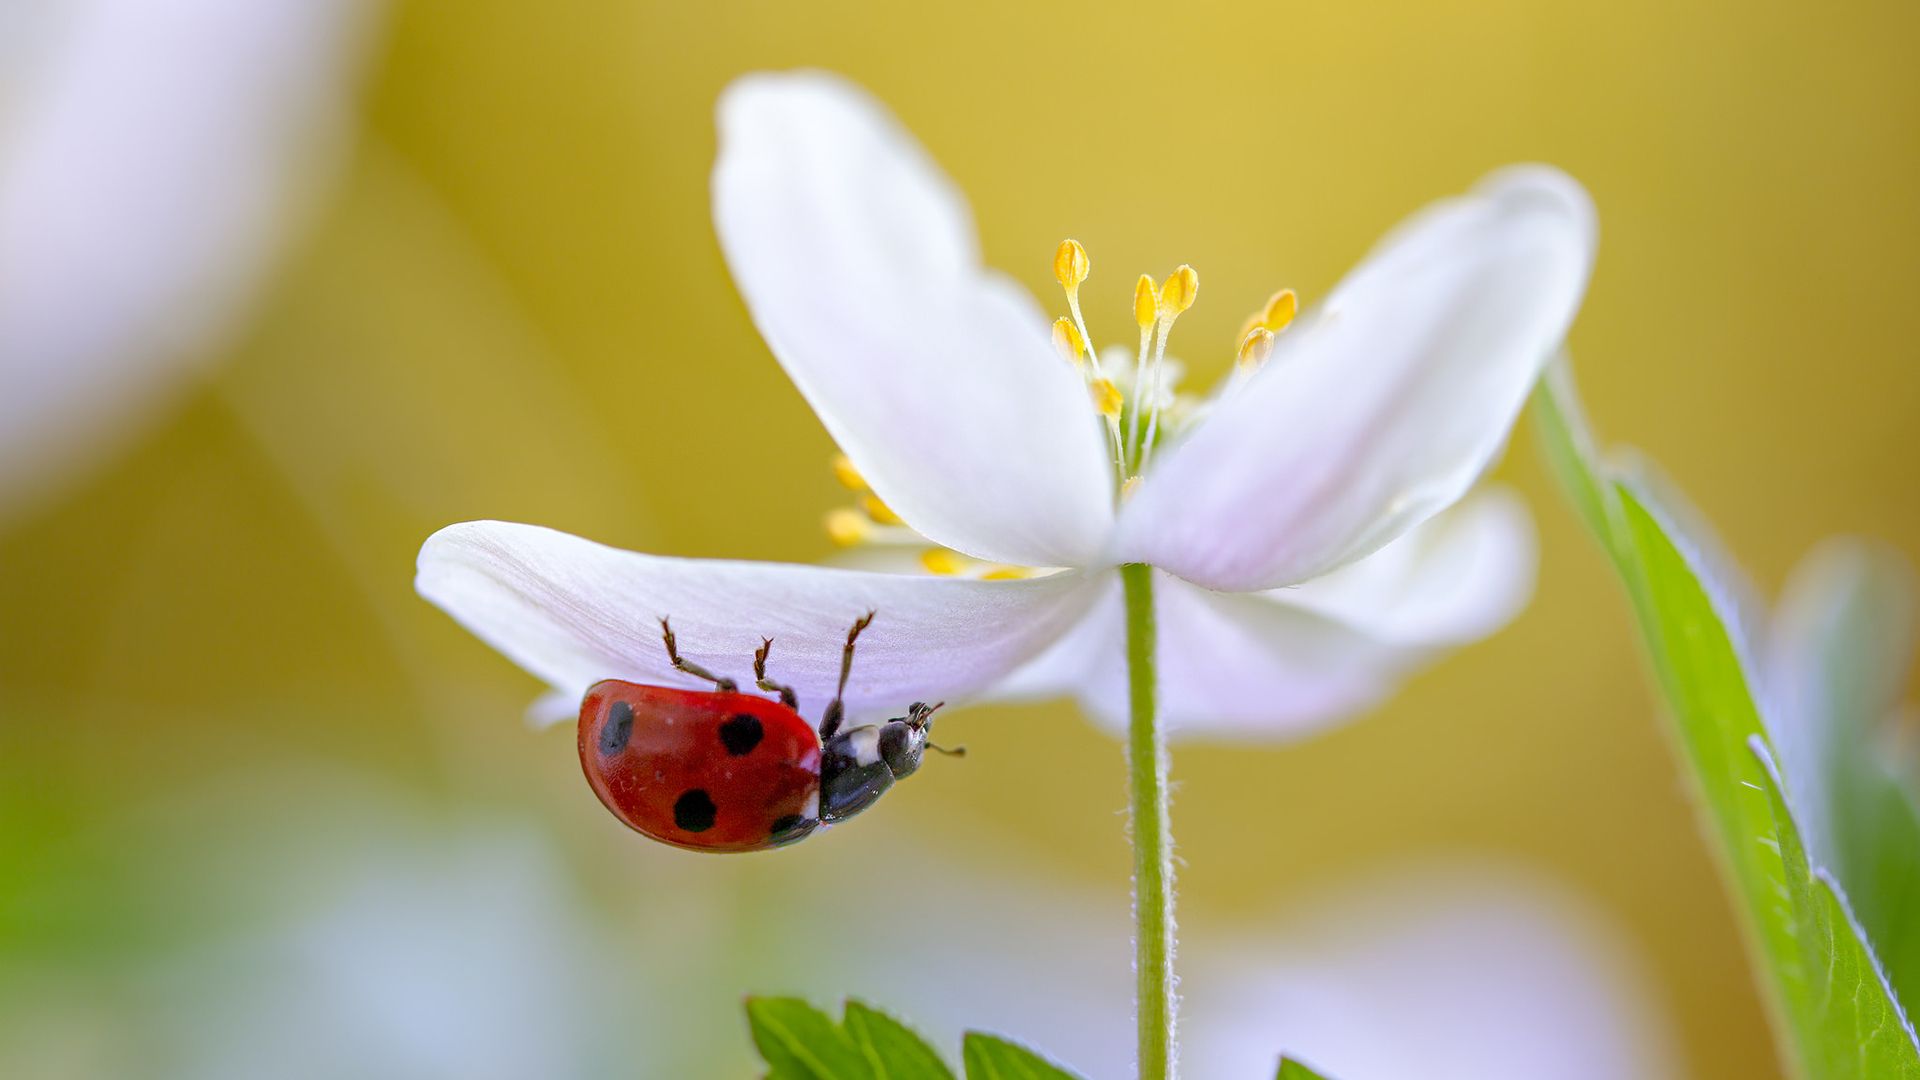 Pictures Of Ladybug On A Flower